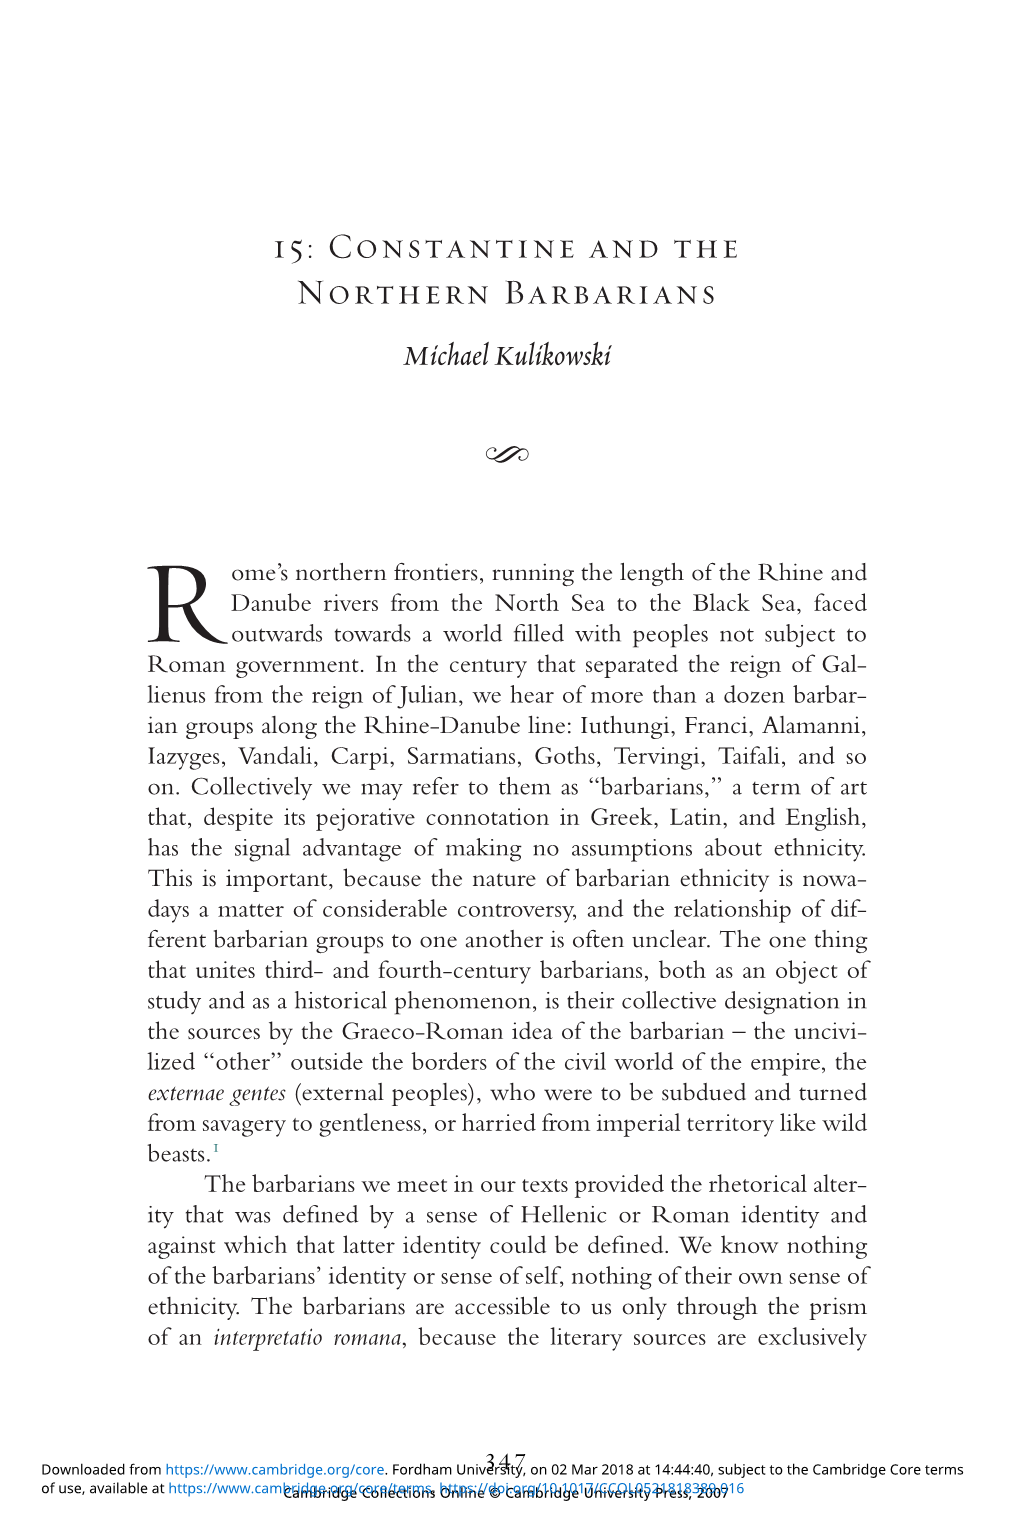 Constantine and the Northern Barbarians